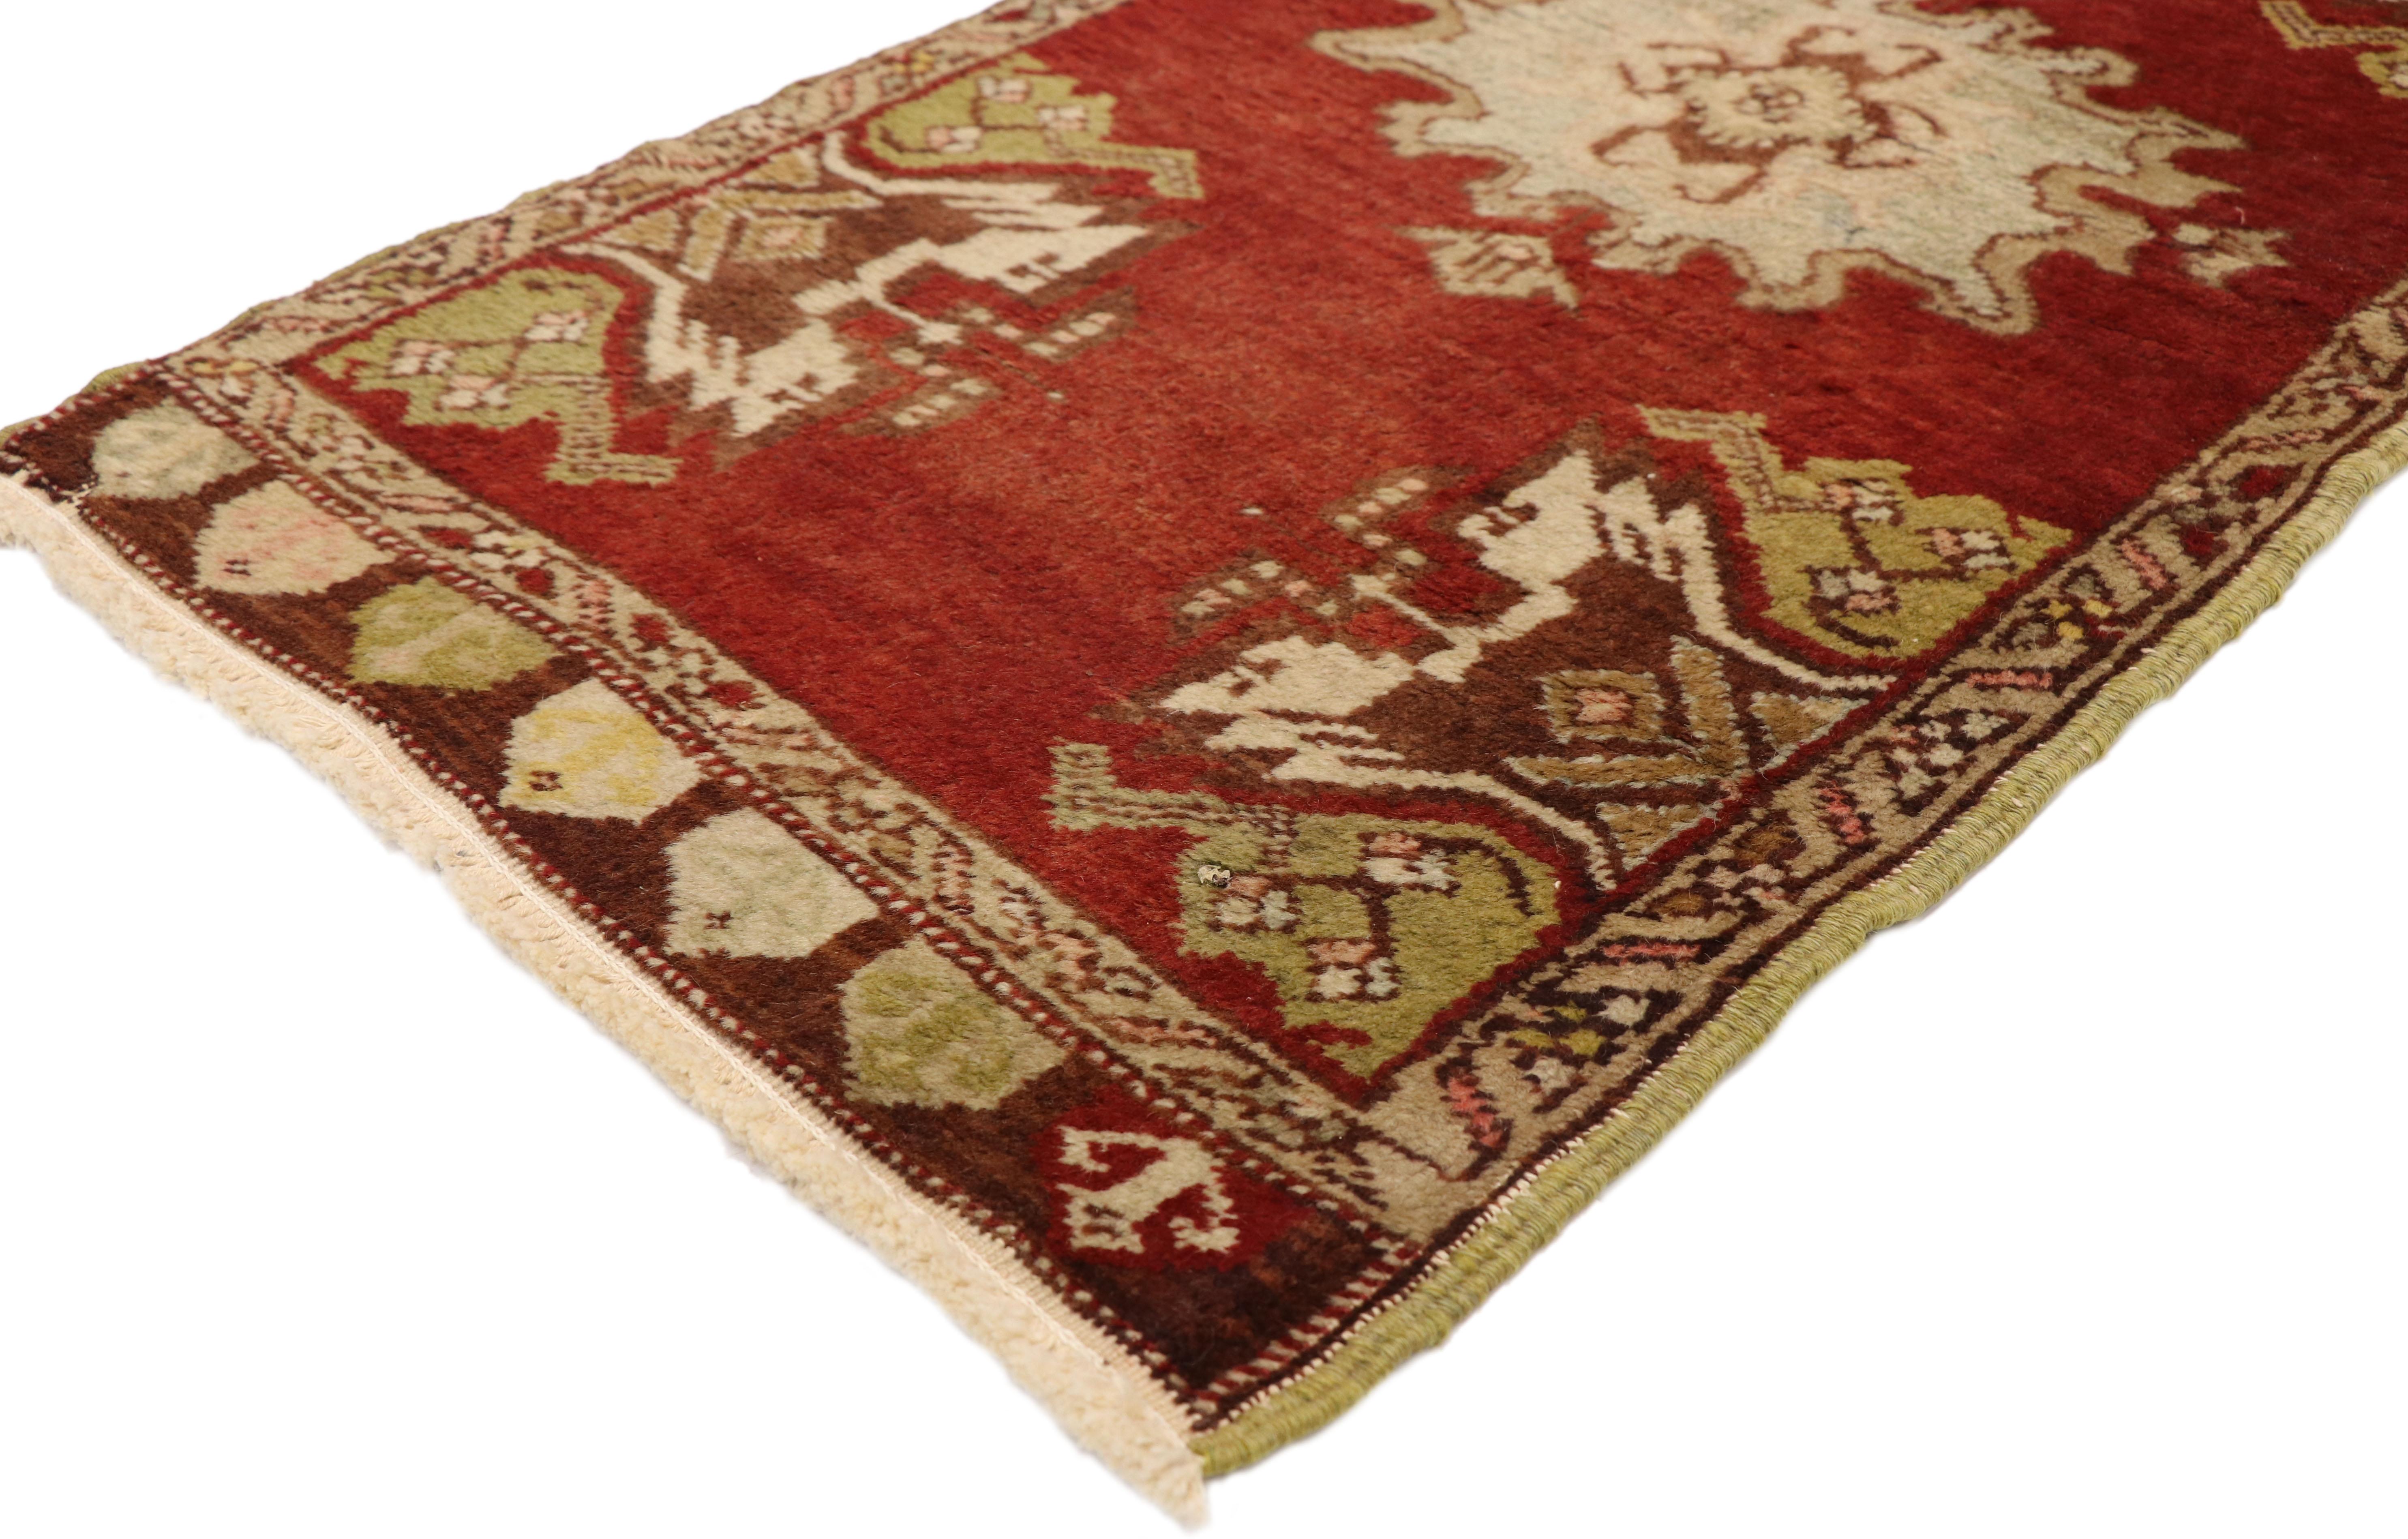 51217, vintage Turkish Oushak Yastik Scatter rug, small accent rug 01'09 x 03'07. This hand knotted wool vintage Turkish Oushak Yastik scatter rug features a central medallion patterned with a geometric botanical scene flanked with four ambiguous